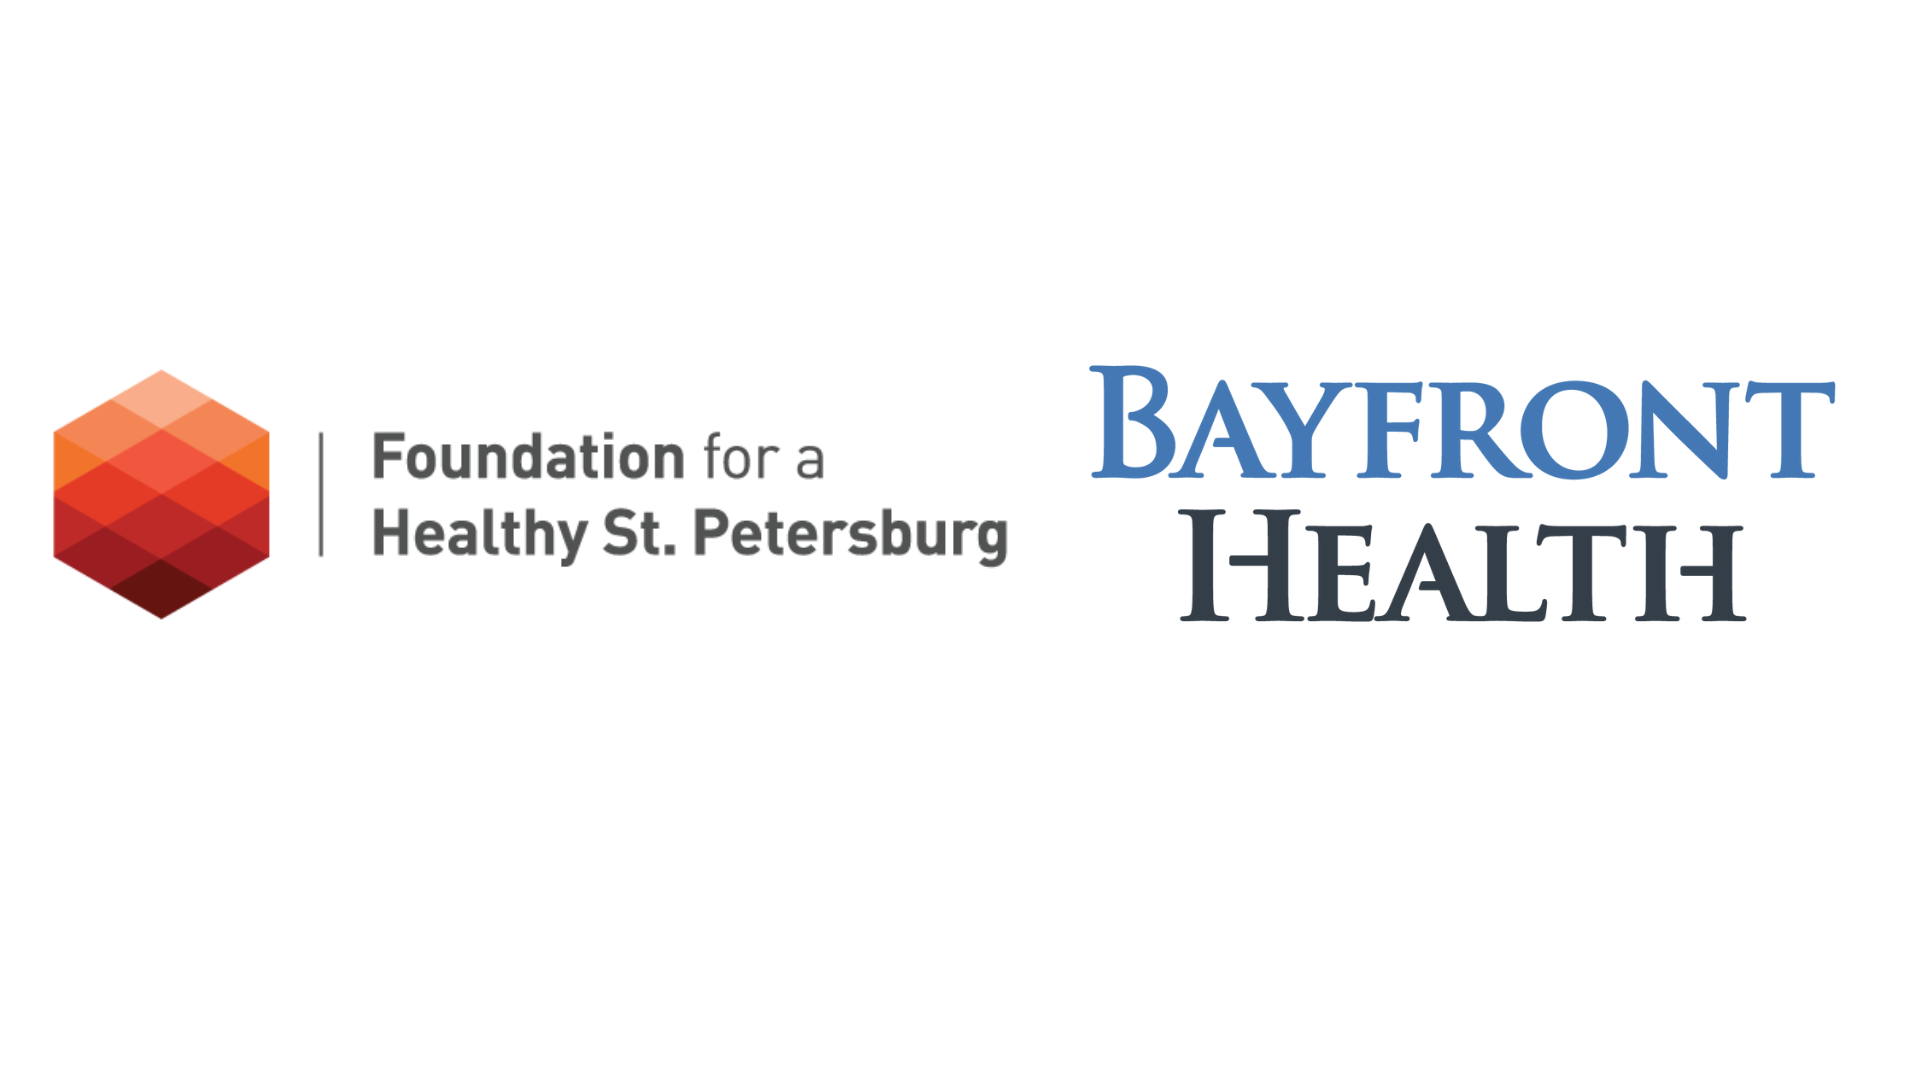 Foundation and Bayfront Health logos